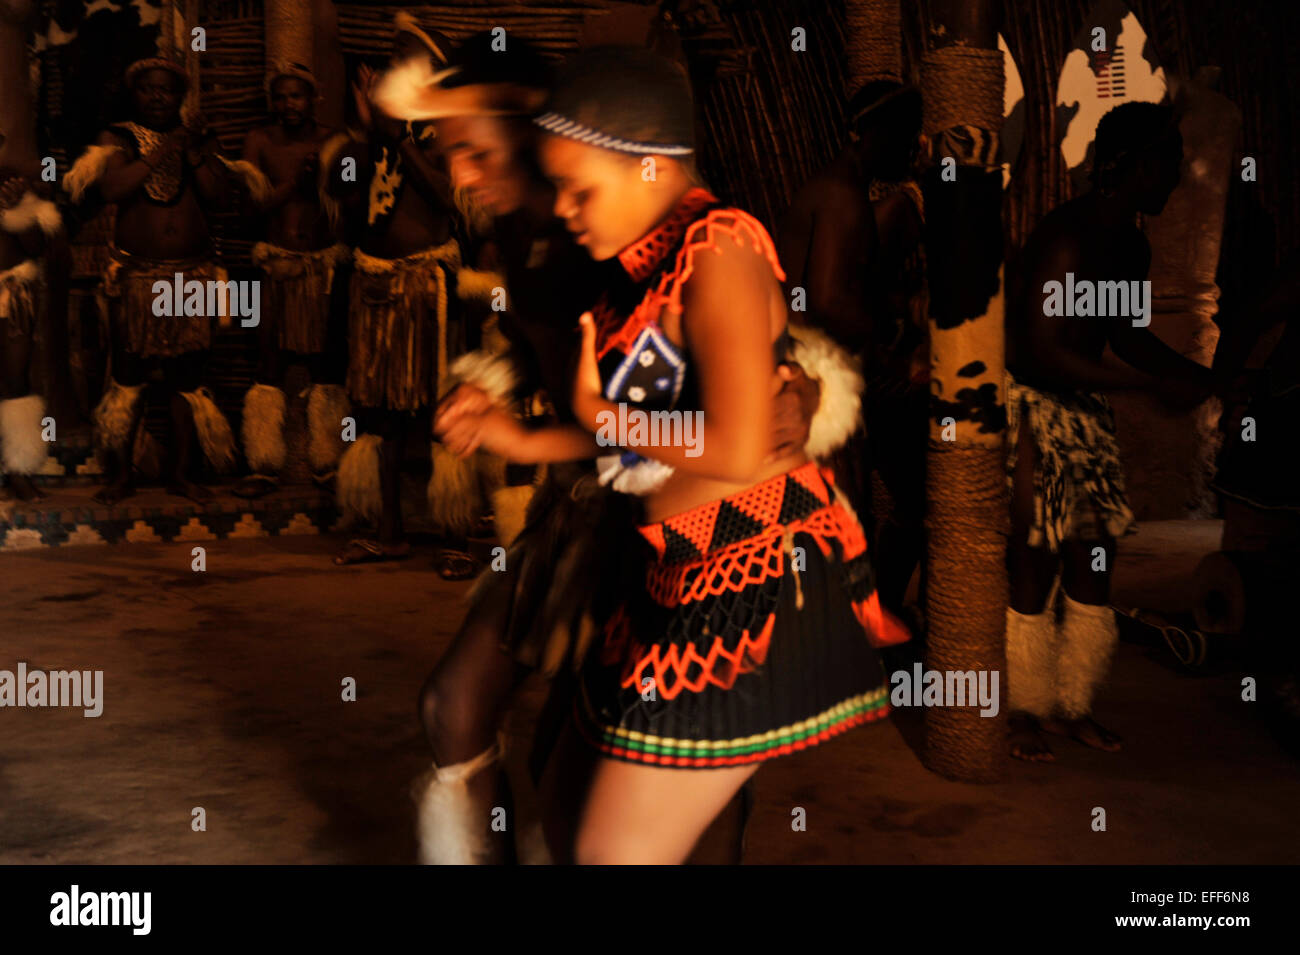 People Culture Adult Man And Woman Dancers Traditional Zulu Dance Shakaland Theme Village 